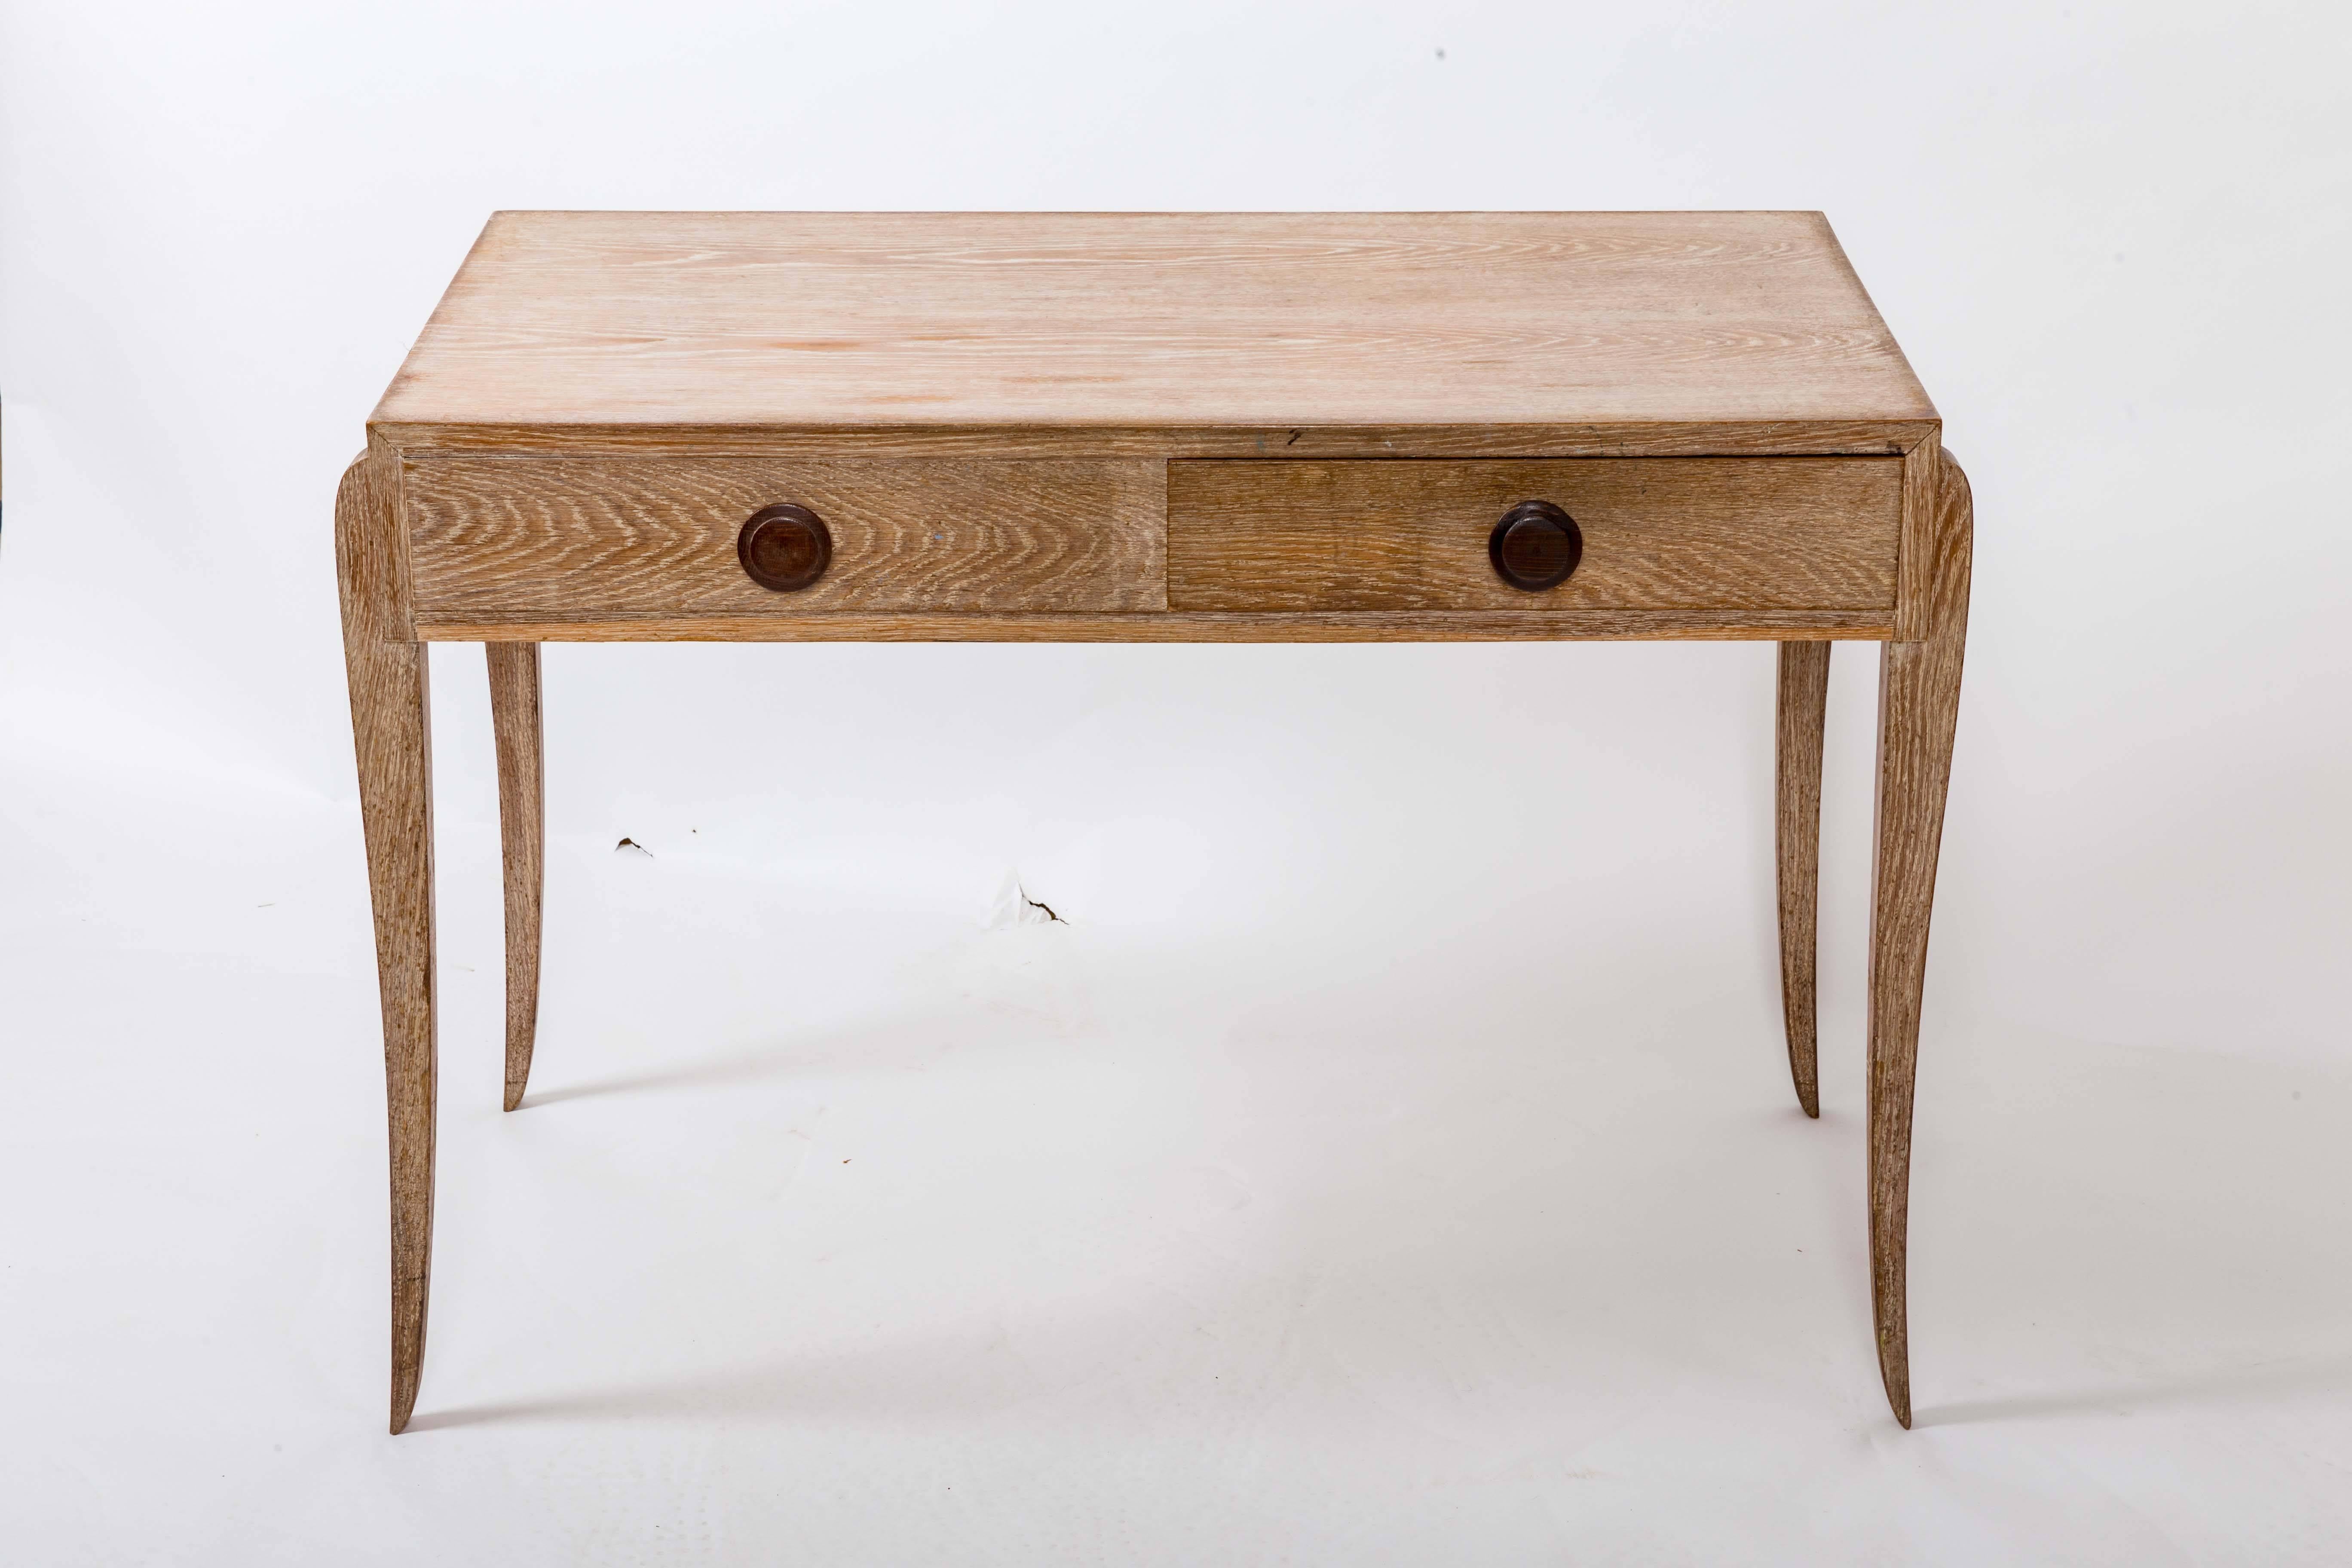 Original limed oak with shaped legs, double-sided with one working drawer and walnut painted knobs.